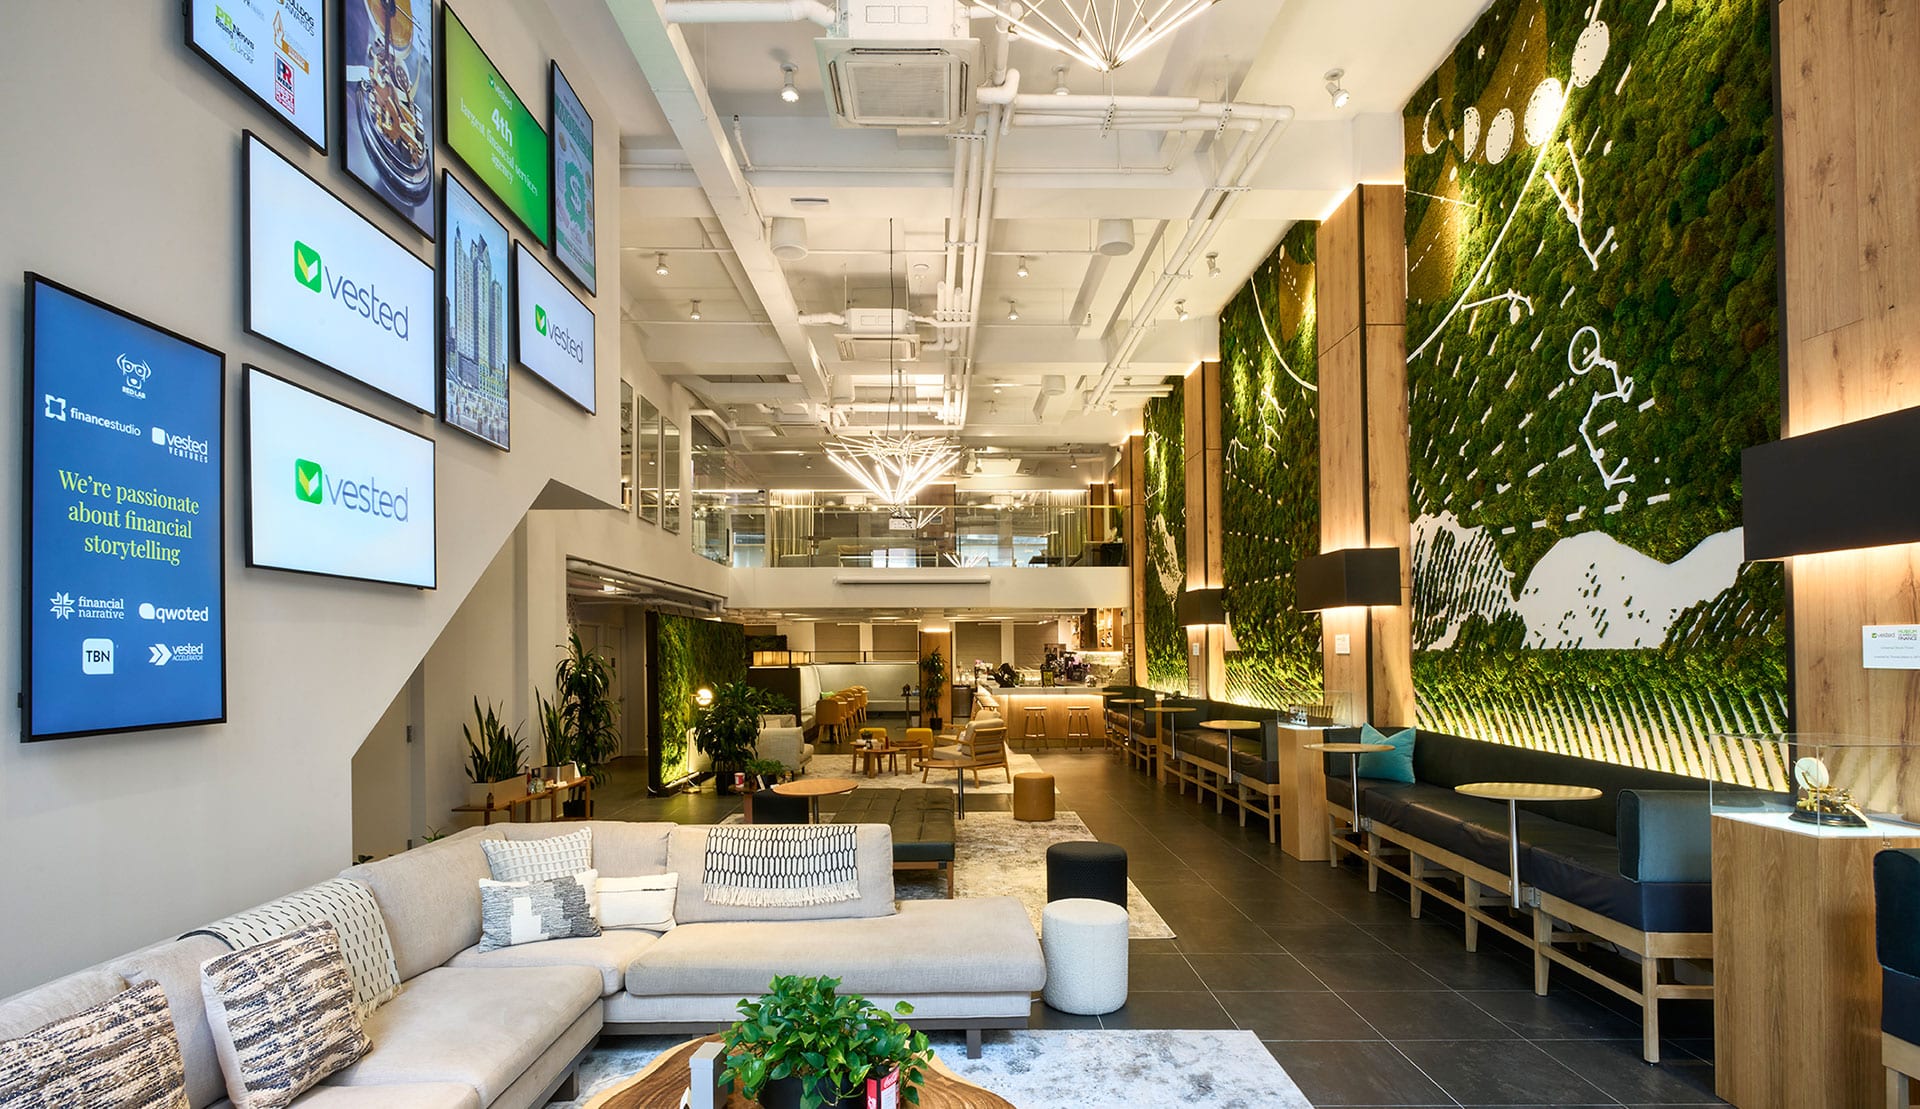 The interior of the NYC headquarters with oversized couches and lots of greenery, in a high ceiling loft-like modern space.